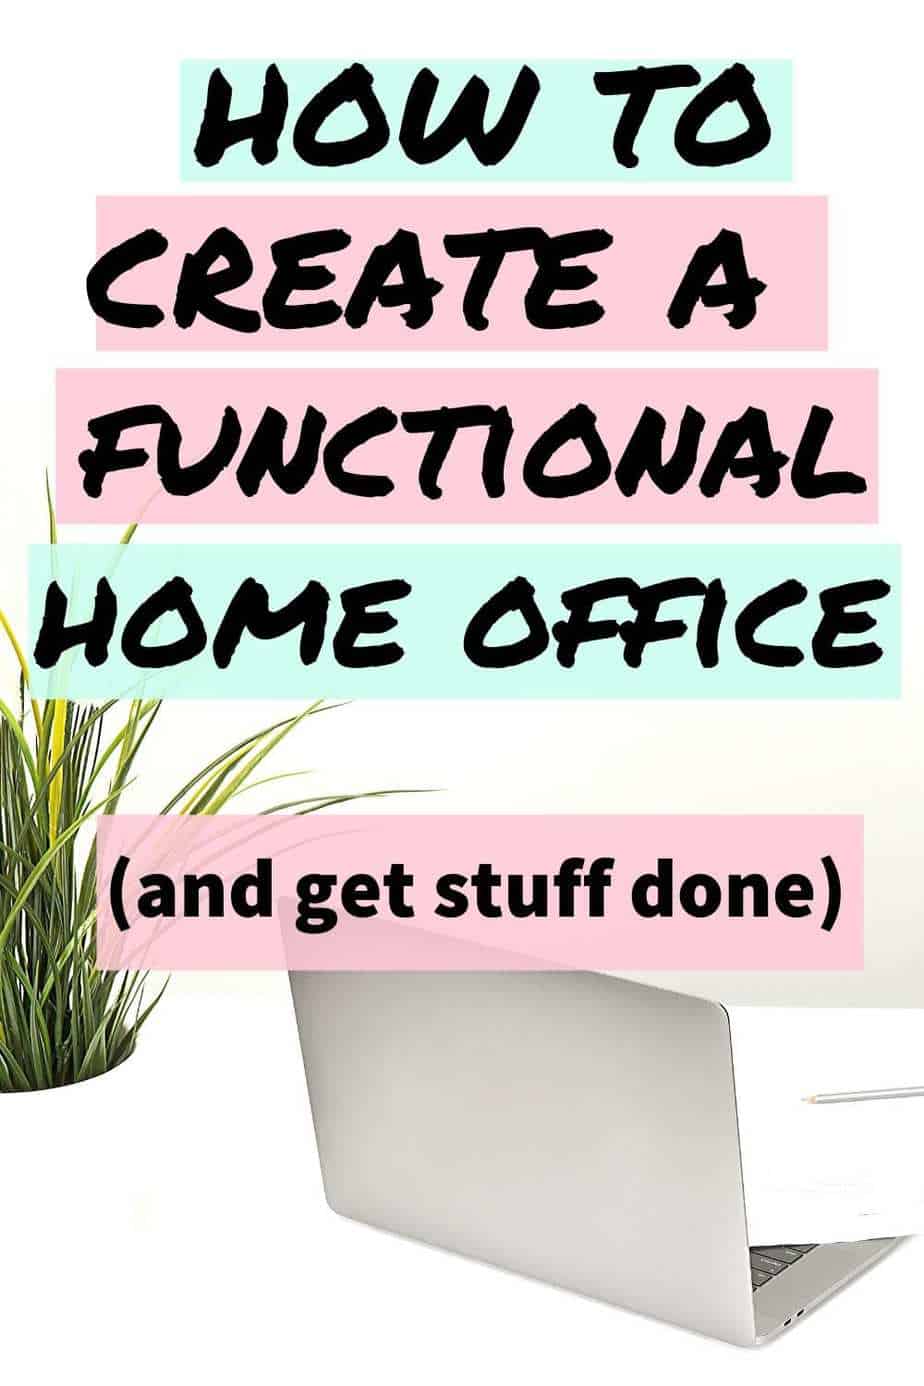 How to create a functional home office